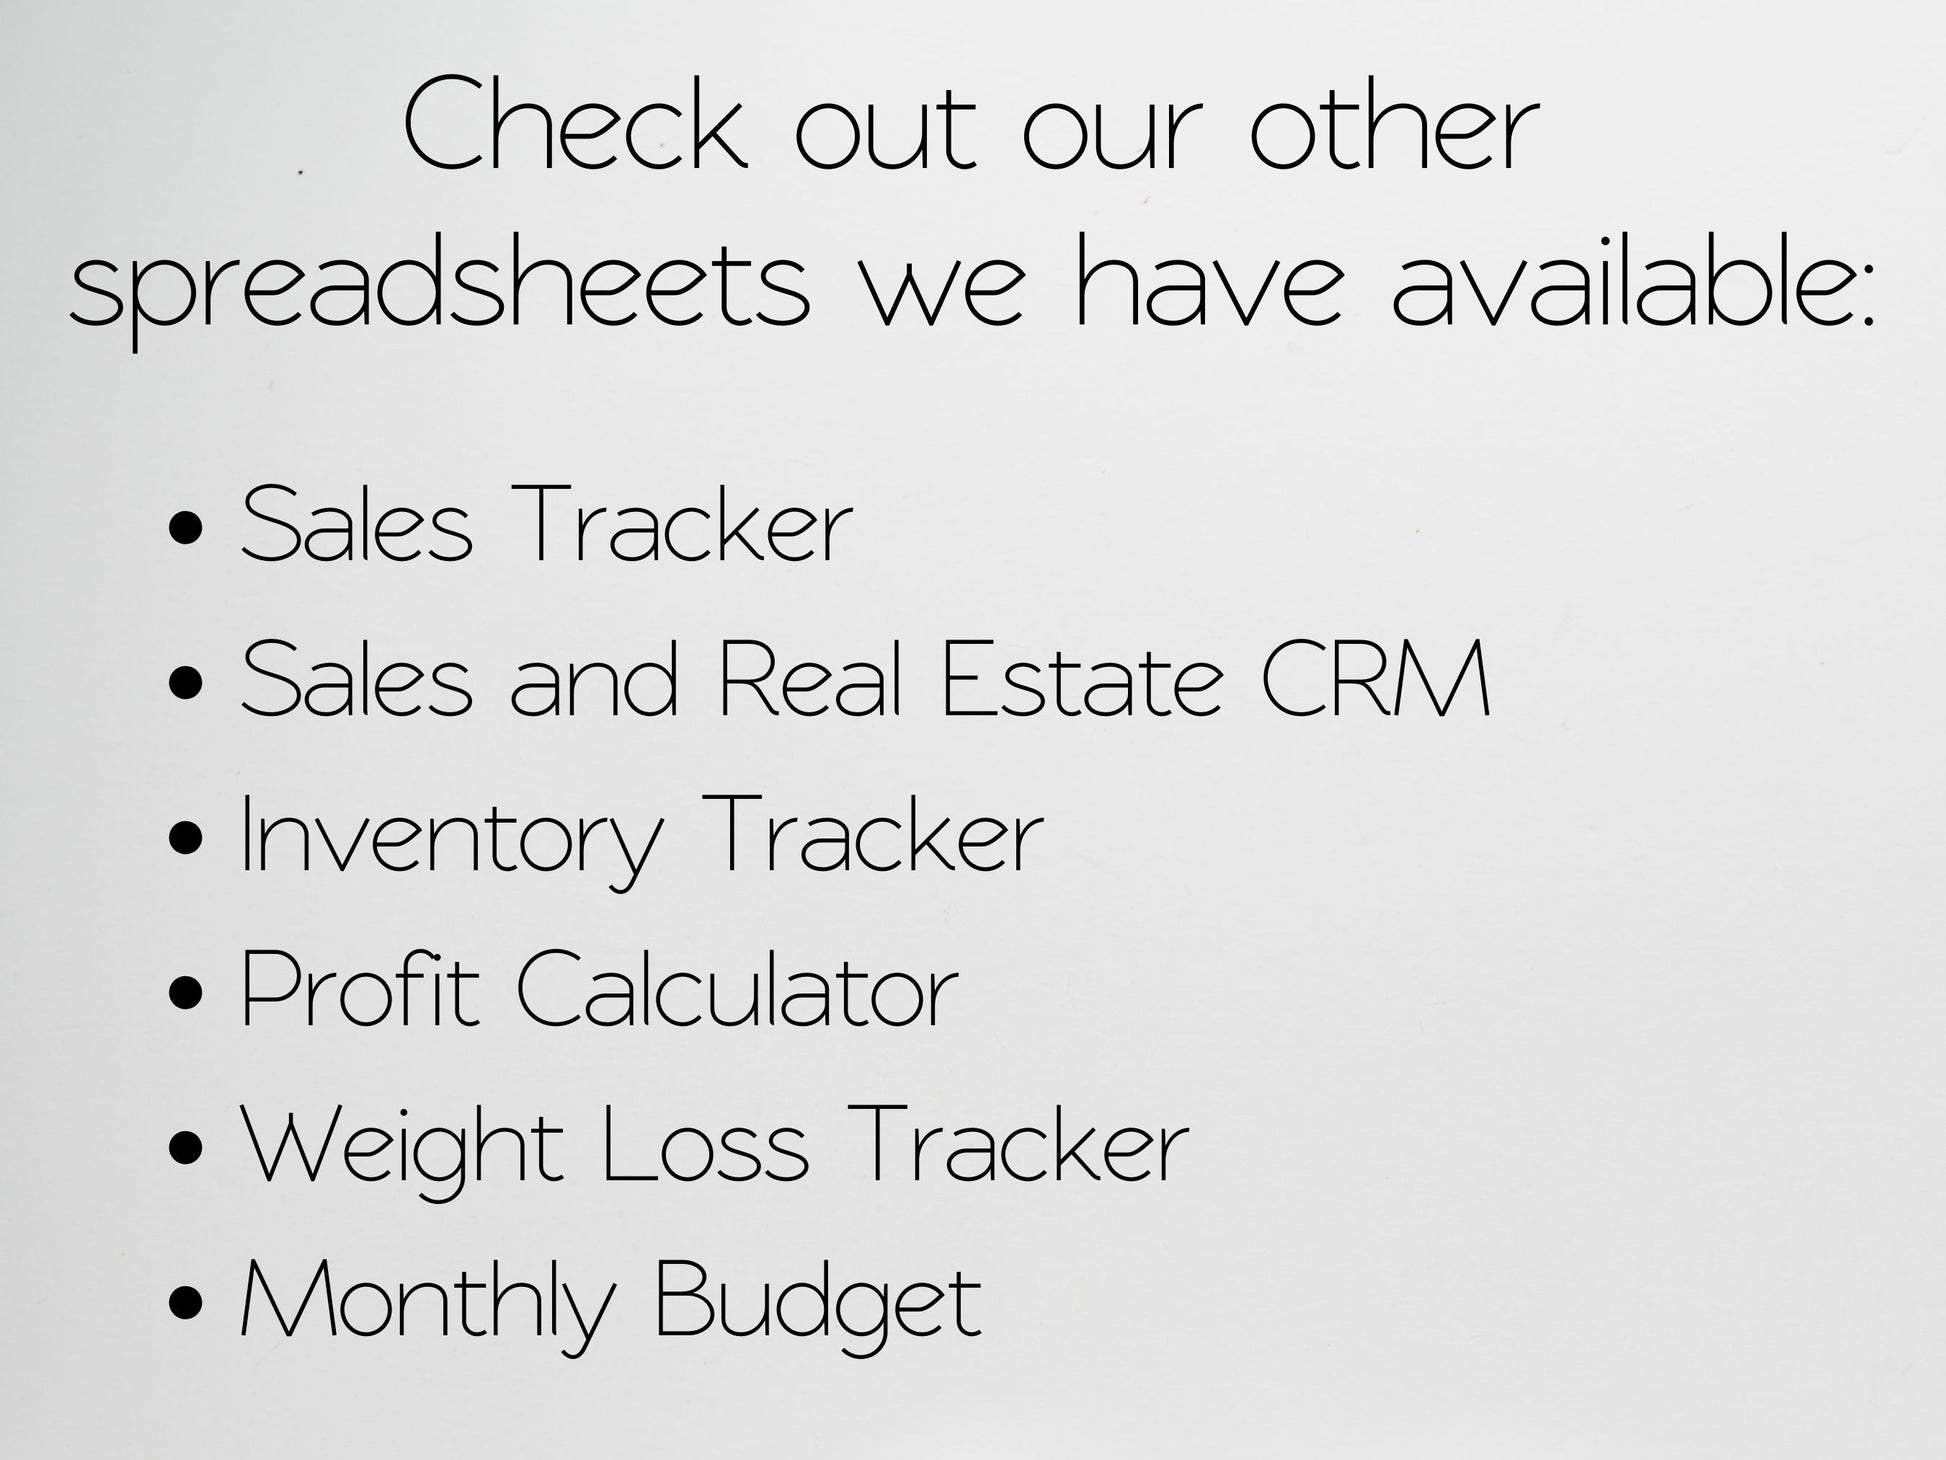 Goal Chart, Sales Tracker for Real Estate